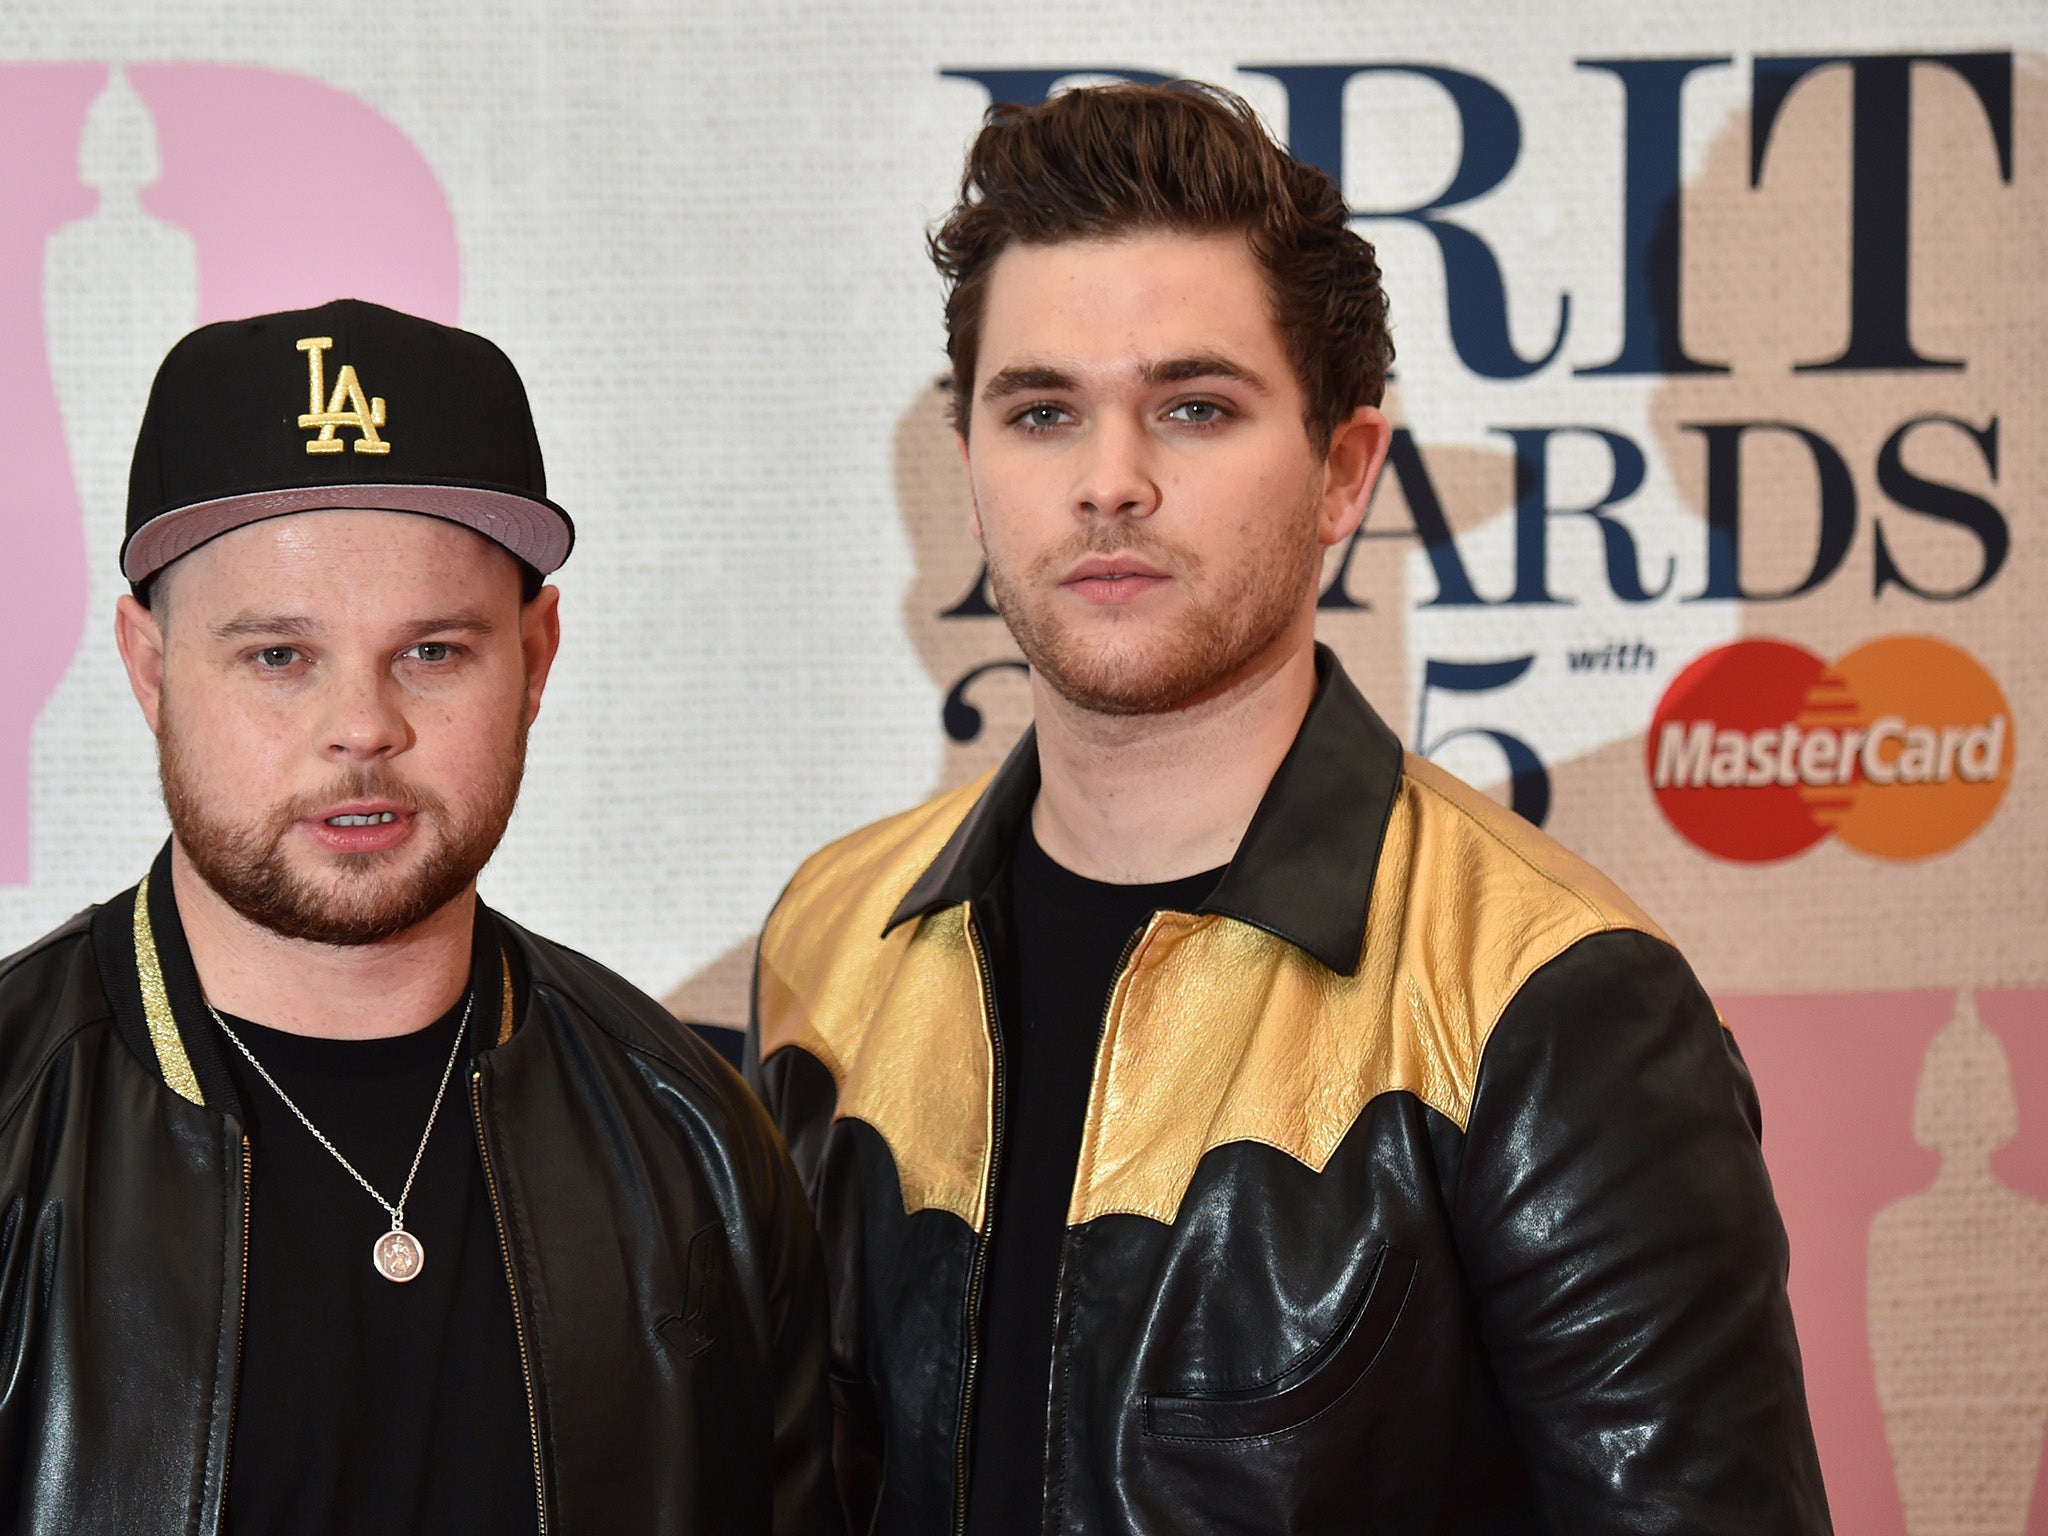 Mike Kerr and Ben Thatcher of Royal Blood (Getty)